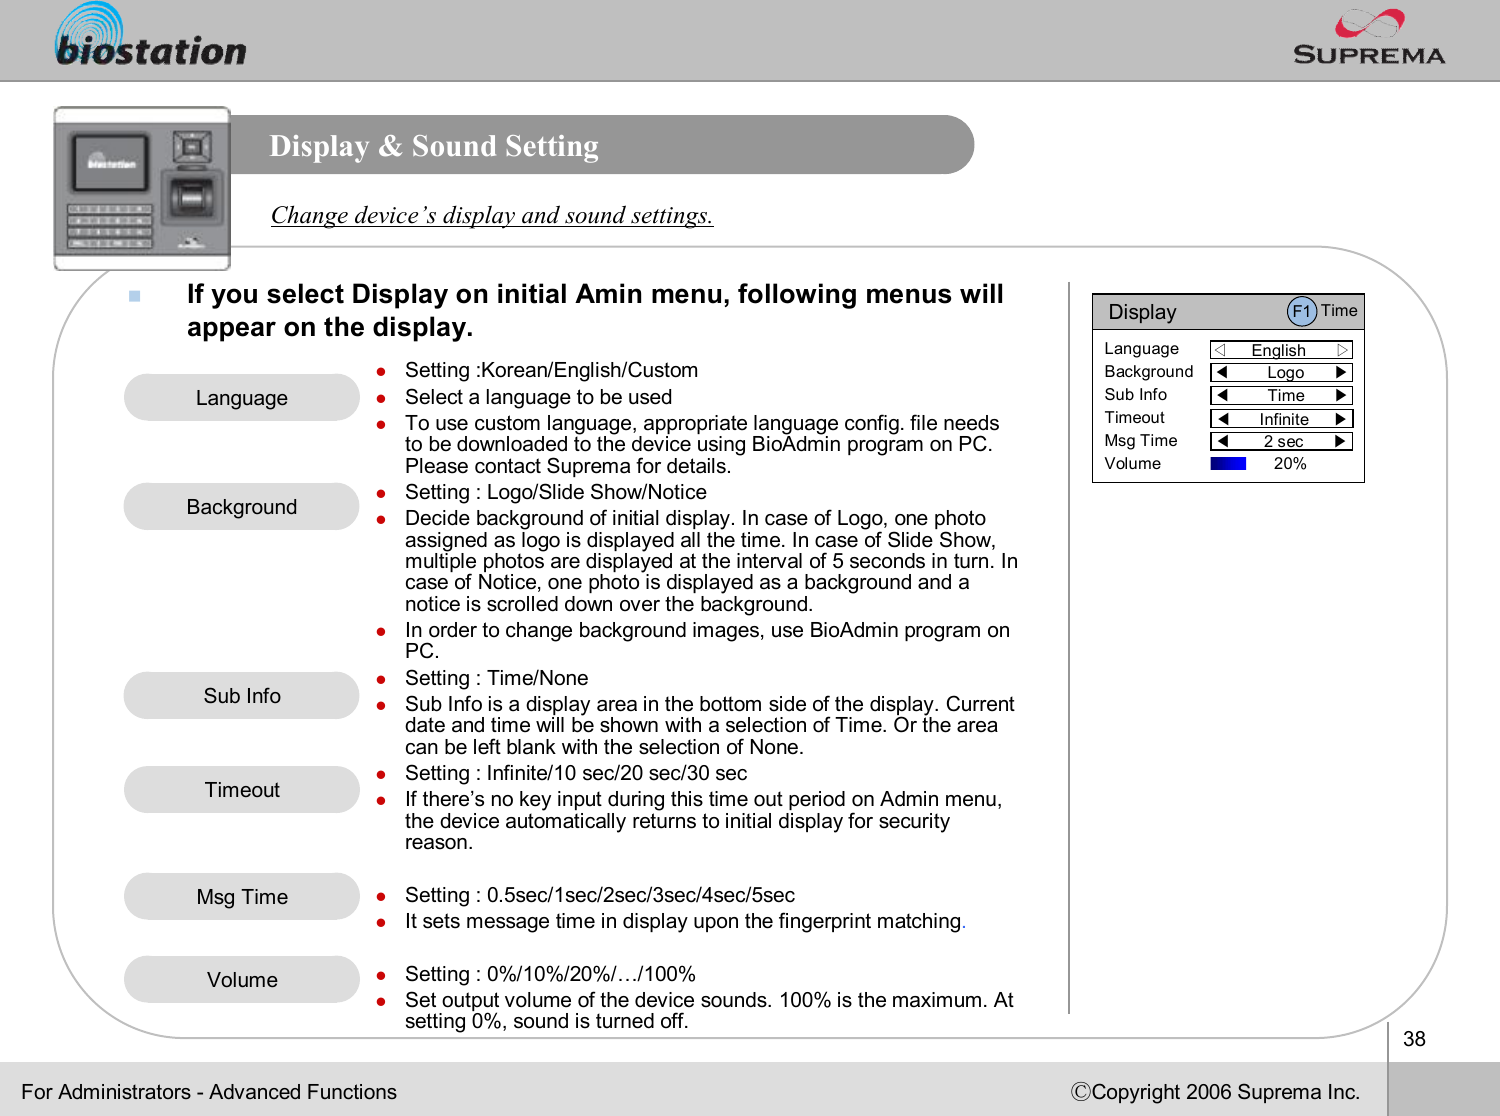 38ⒸCopyright 2006 Suprema Inc.Display &amp; Sound SettingnIf you select Display on initial Amin menu, following menus willappear on the display. Change device’s display and sound settings.lSetting :Korean/English/CustomlSelect a language to be used lTo use custom language, appropriate language config. file needs to be downloaded to the device using BioAdmin program on PC. Please contact Suprema for details.lSetting : Logo/Slide Show/NoticelDecide background of initial display. In case of Logo, one photoassigned as logo is displayed all the time. In case of Slide Show, multiple photos are displayed at the interval of 5 seconds in turn. In case of Notice, one photo is displayed as a background and a notice is scrolled down over the background.lIn order to change background images, use BioAdmin program on PC.lSetting : Time/None lSub Info is a display area in the bottom side of the display. Current date and time will be shown with a selection of Time. Or the area can be left blank with the selection of None. lSetting : Infinite/10 sec/20 sec/30 seclIf there’s no key input during this time out period on Admin menu, the device automatically returns to initial display for securityreason. lSetting : 0.5sec/1sec/2sec/3sec/4sec/5seclIt sets message time in display upon the fingerprint matching.lSetting : 0%/10%/20%/…/100%lSet output volume of the device sounds. 100% is the maximum. At setting 0%, sound is turned off.LanguageBackgroundSub InfoTimeoutVolumeFor Administrators -Advanced FunctionsMsg TimeDisplay◁English      ▷LanguageBackgroundSub InfoTimeoutMsg TimeVolume◀Logo      ▶◀Time      ▶◀Infinite     ▶◀2 sec      ▶F1 Time20% 